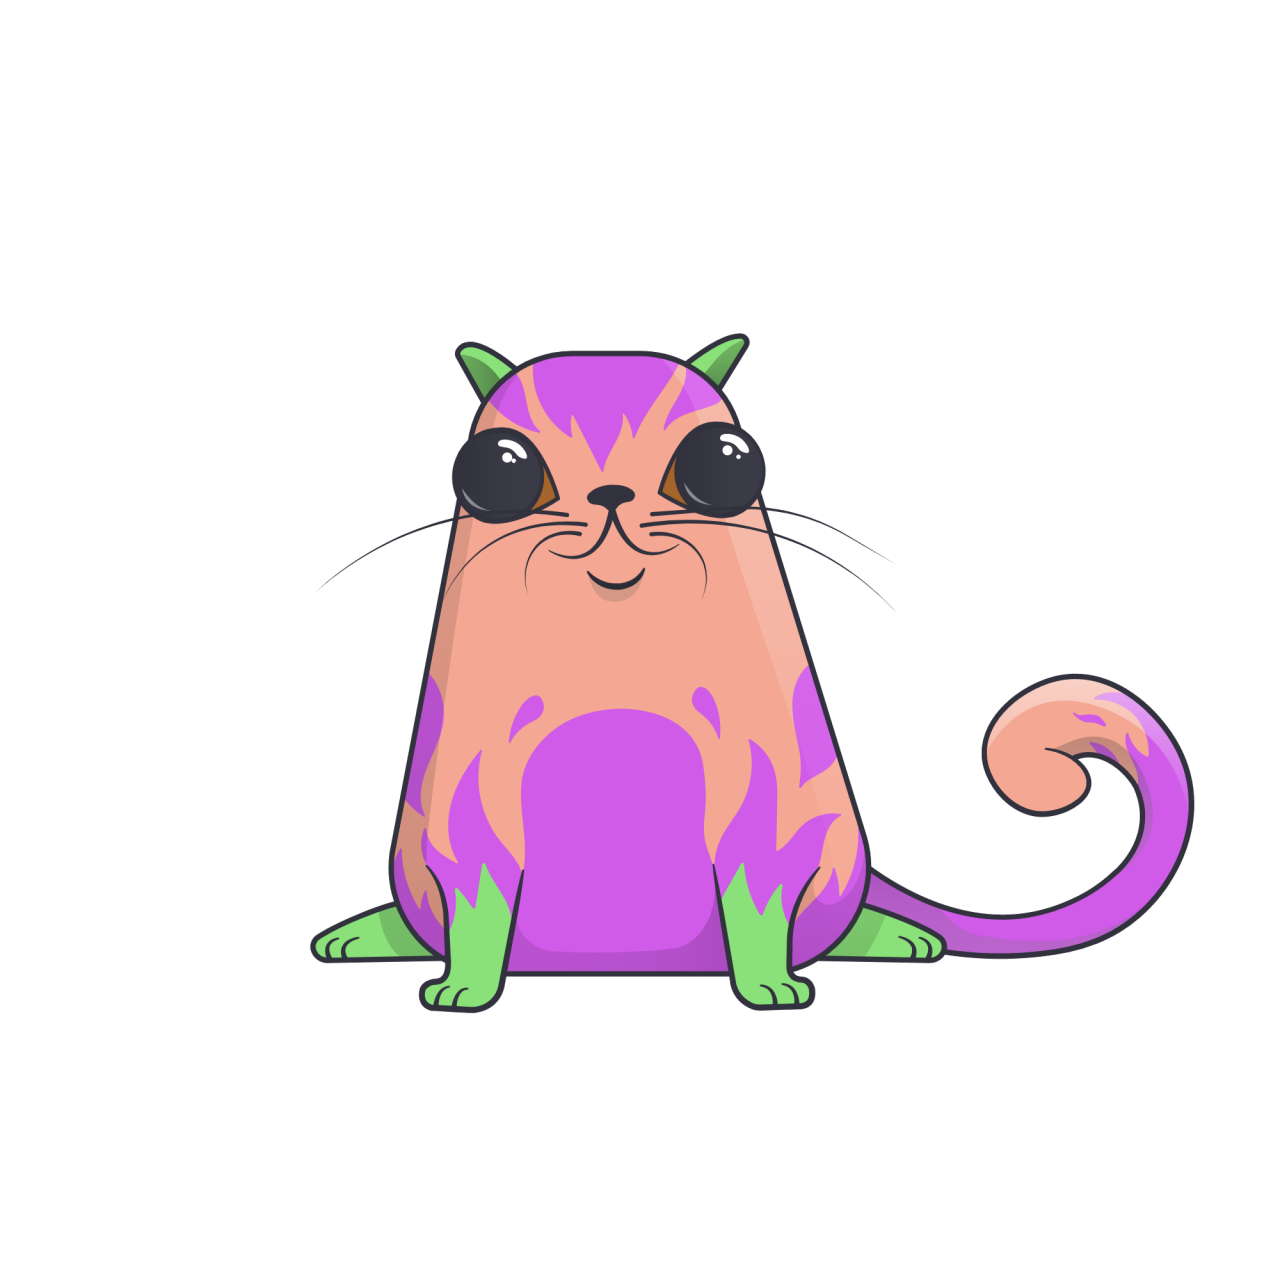 Crypto art: an illustrated colorful cat.